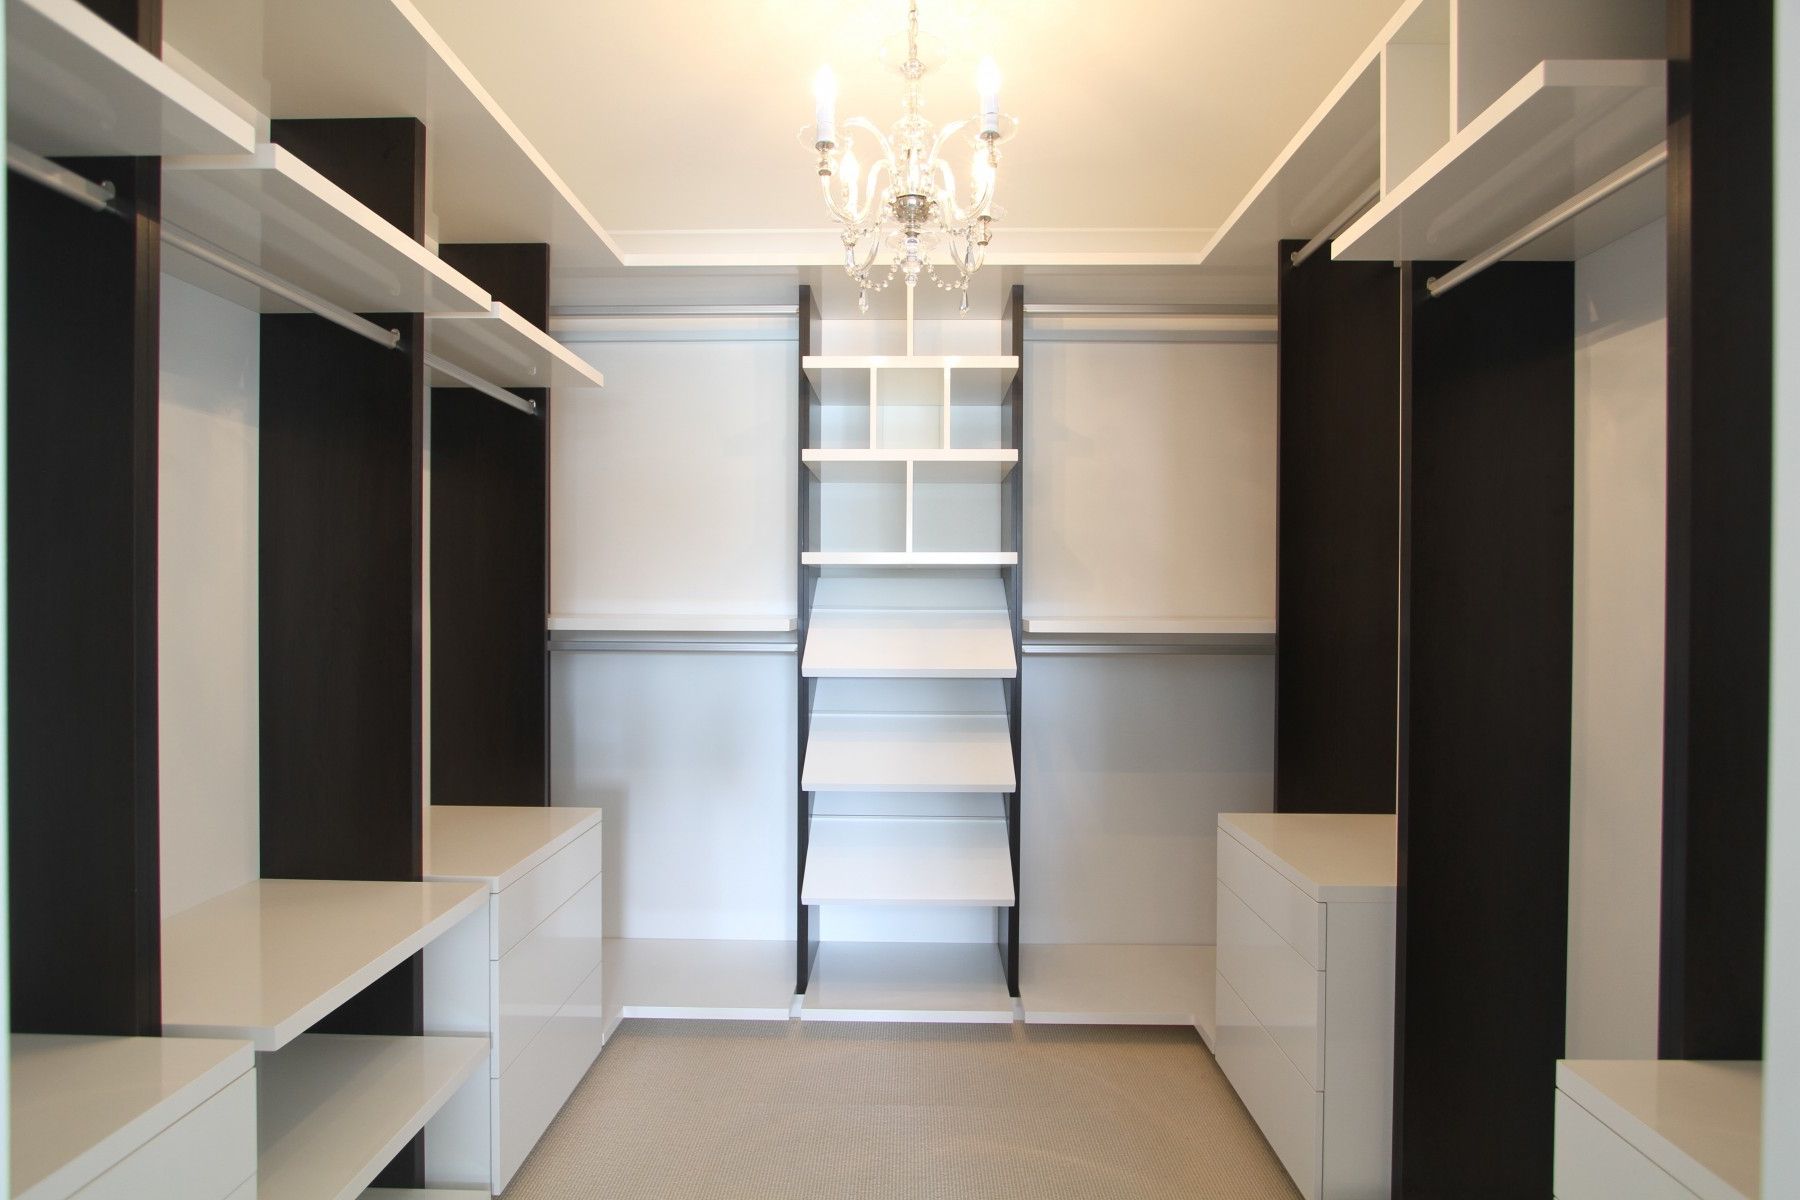 Custom Designed Wardrobes Intended For Signature Wardrobes (View 16 of 20)